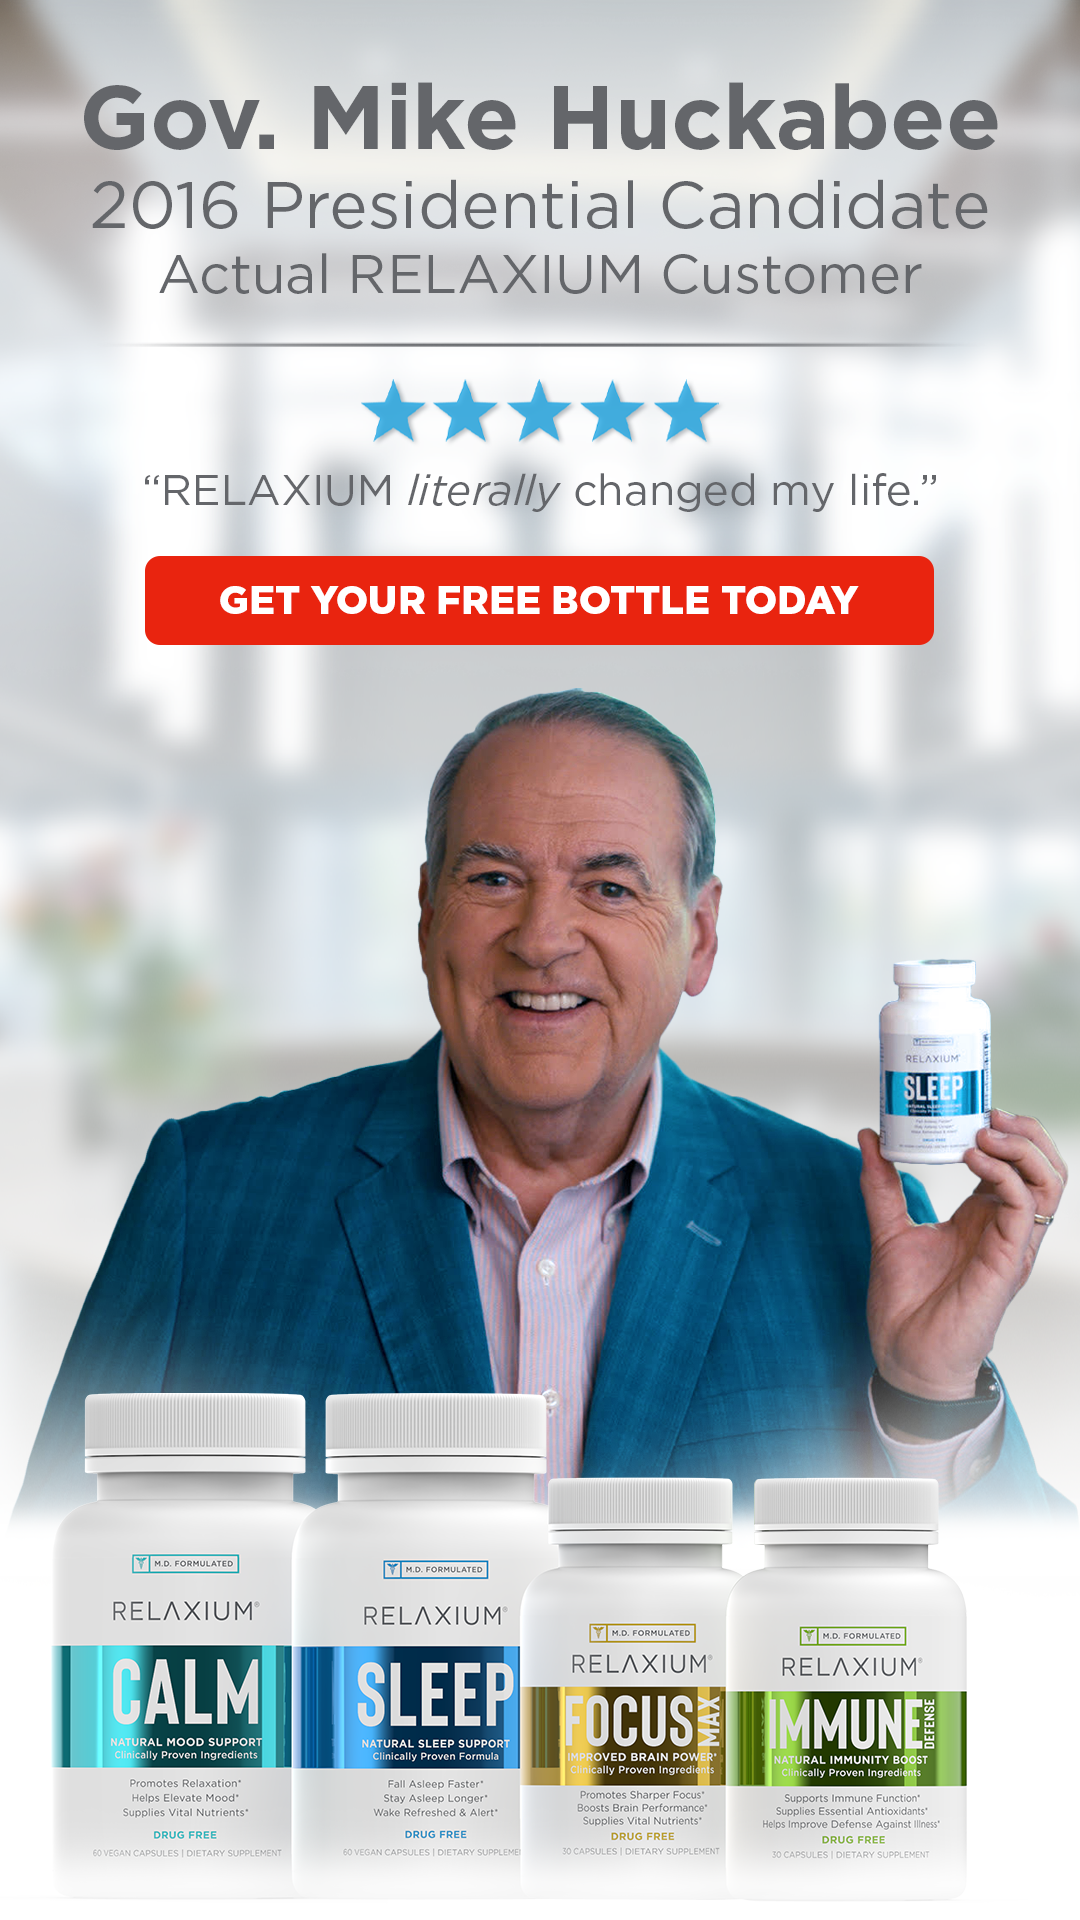 Mike Huckabee showing Relaxium products